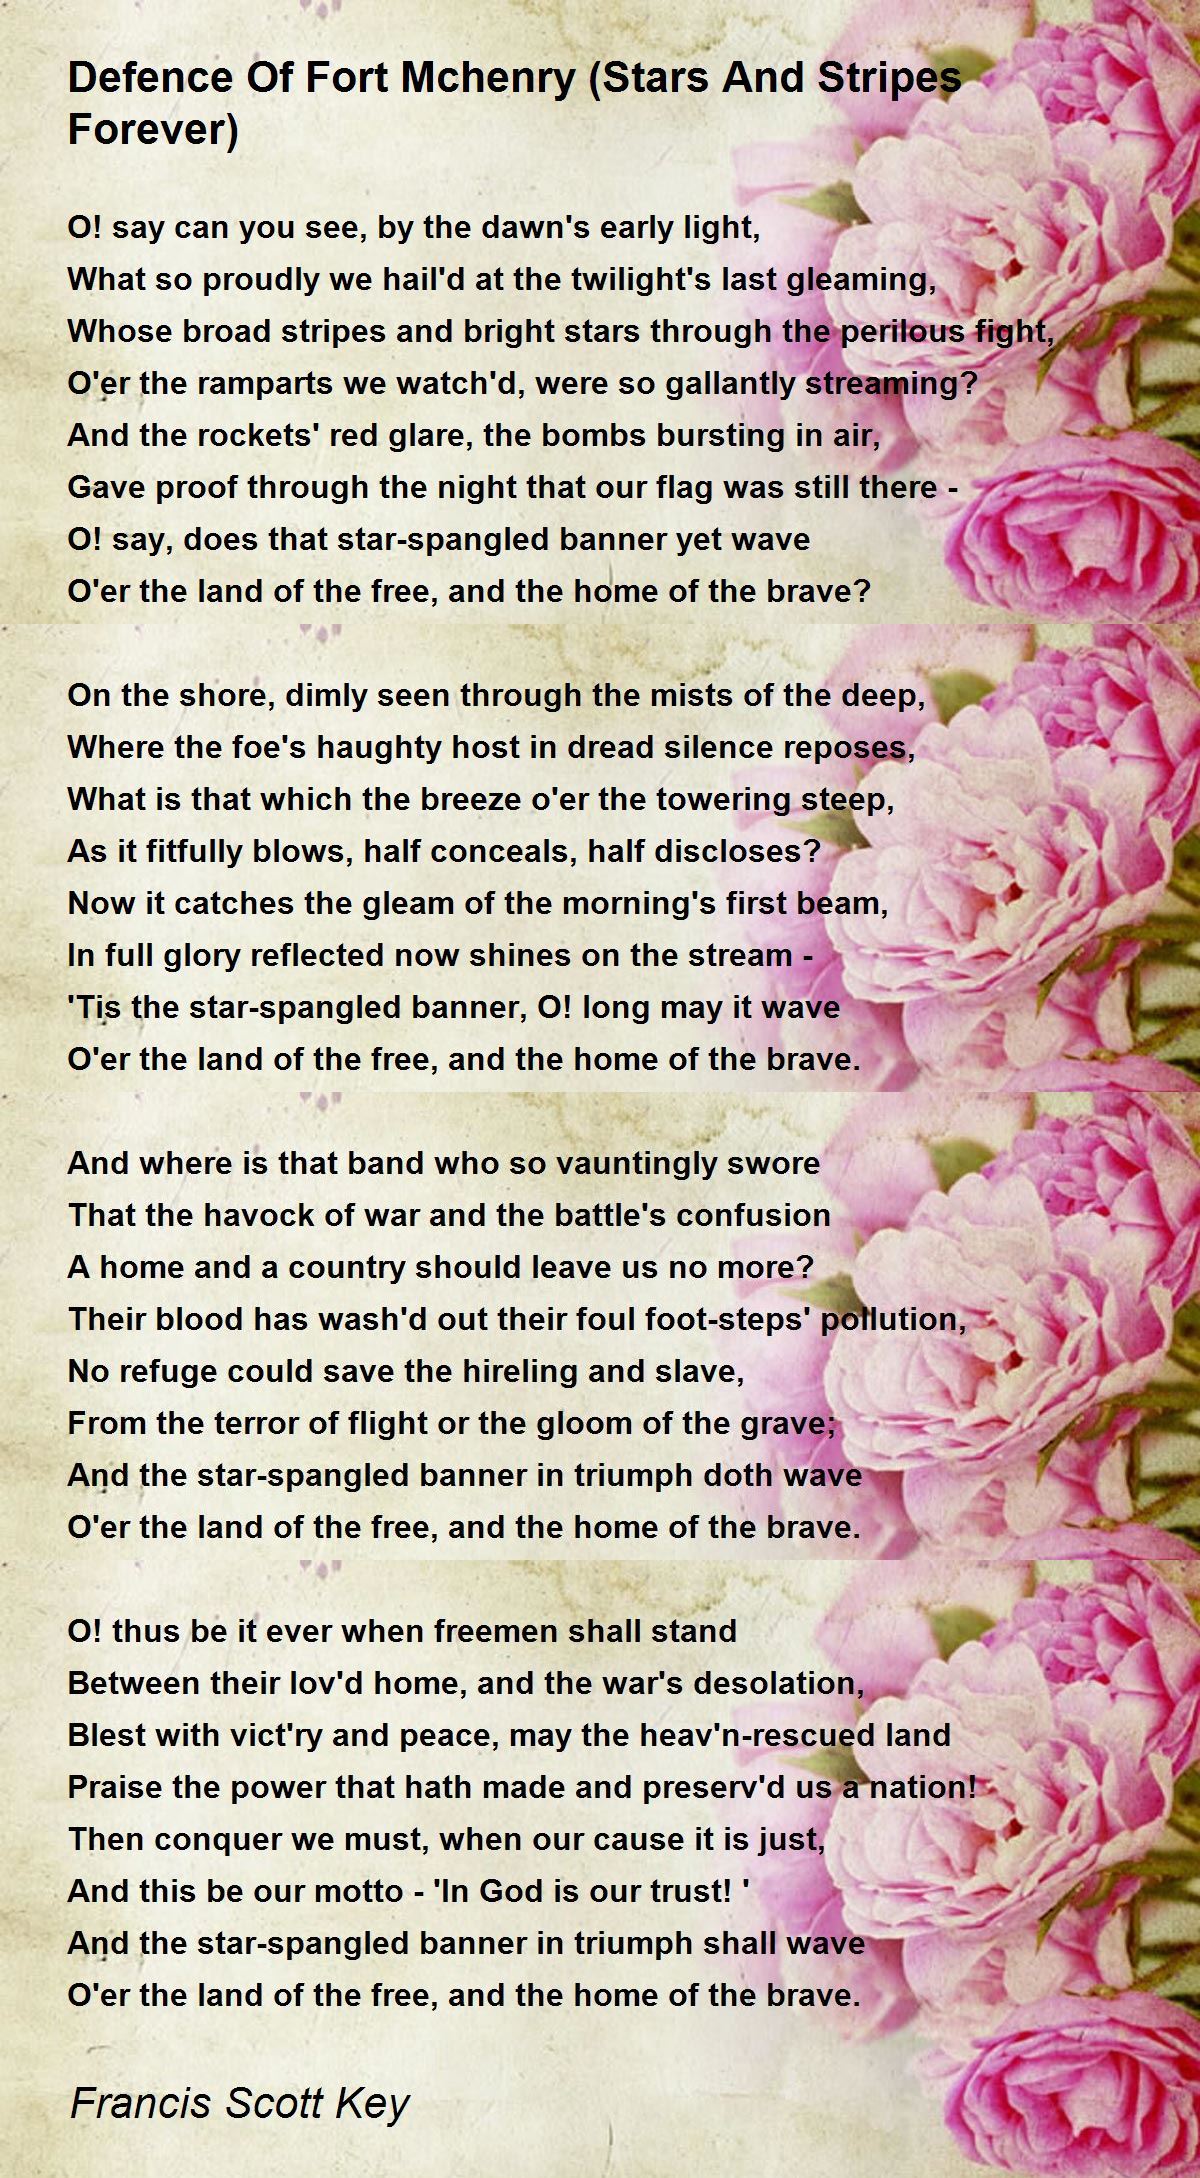 Defence Of Fort Mchenry (Stars And Stripes Forever) Poem by Francis